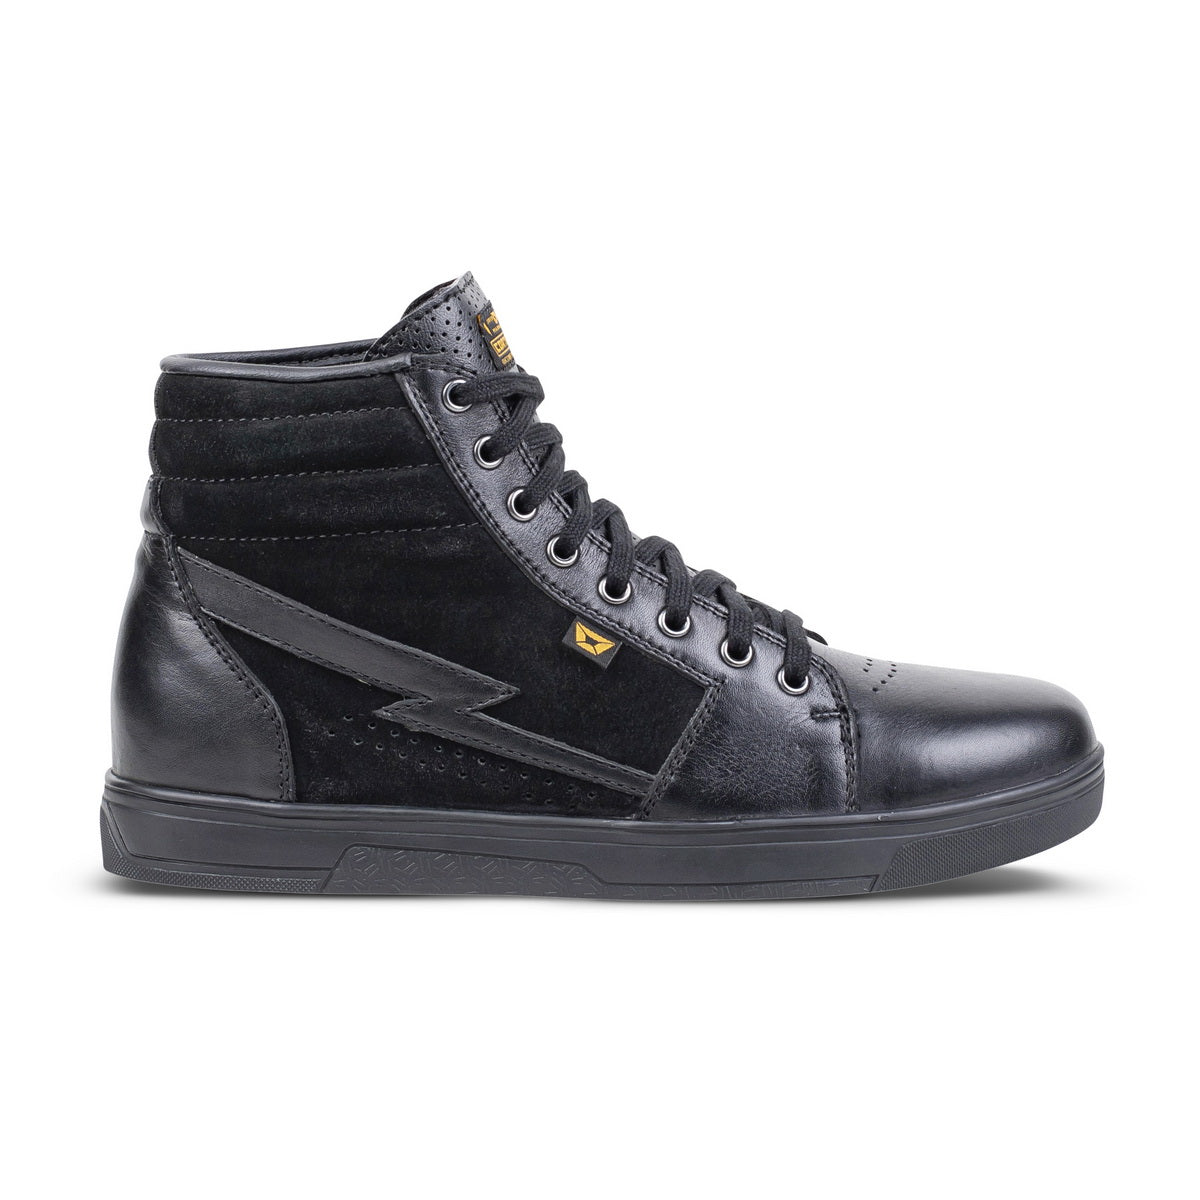 Cortech ‘The Slayer’ Mens Black Casual Street Style Suede with Leather High-Top Riding Shoe